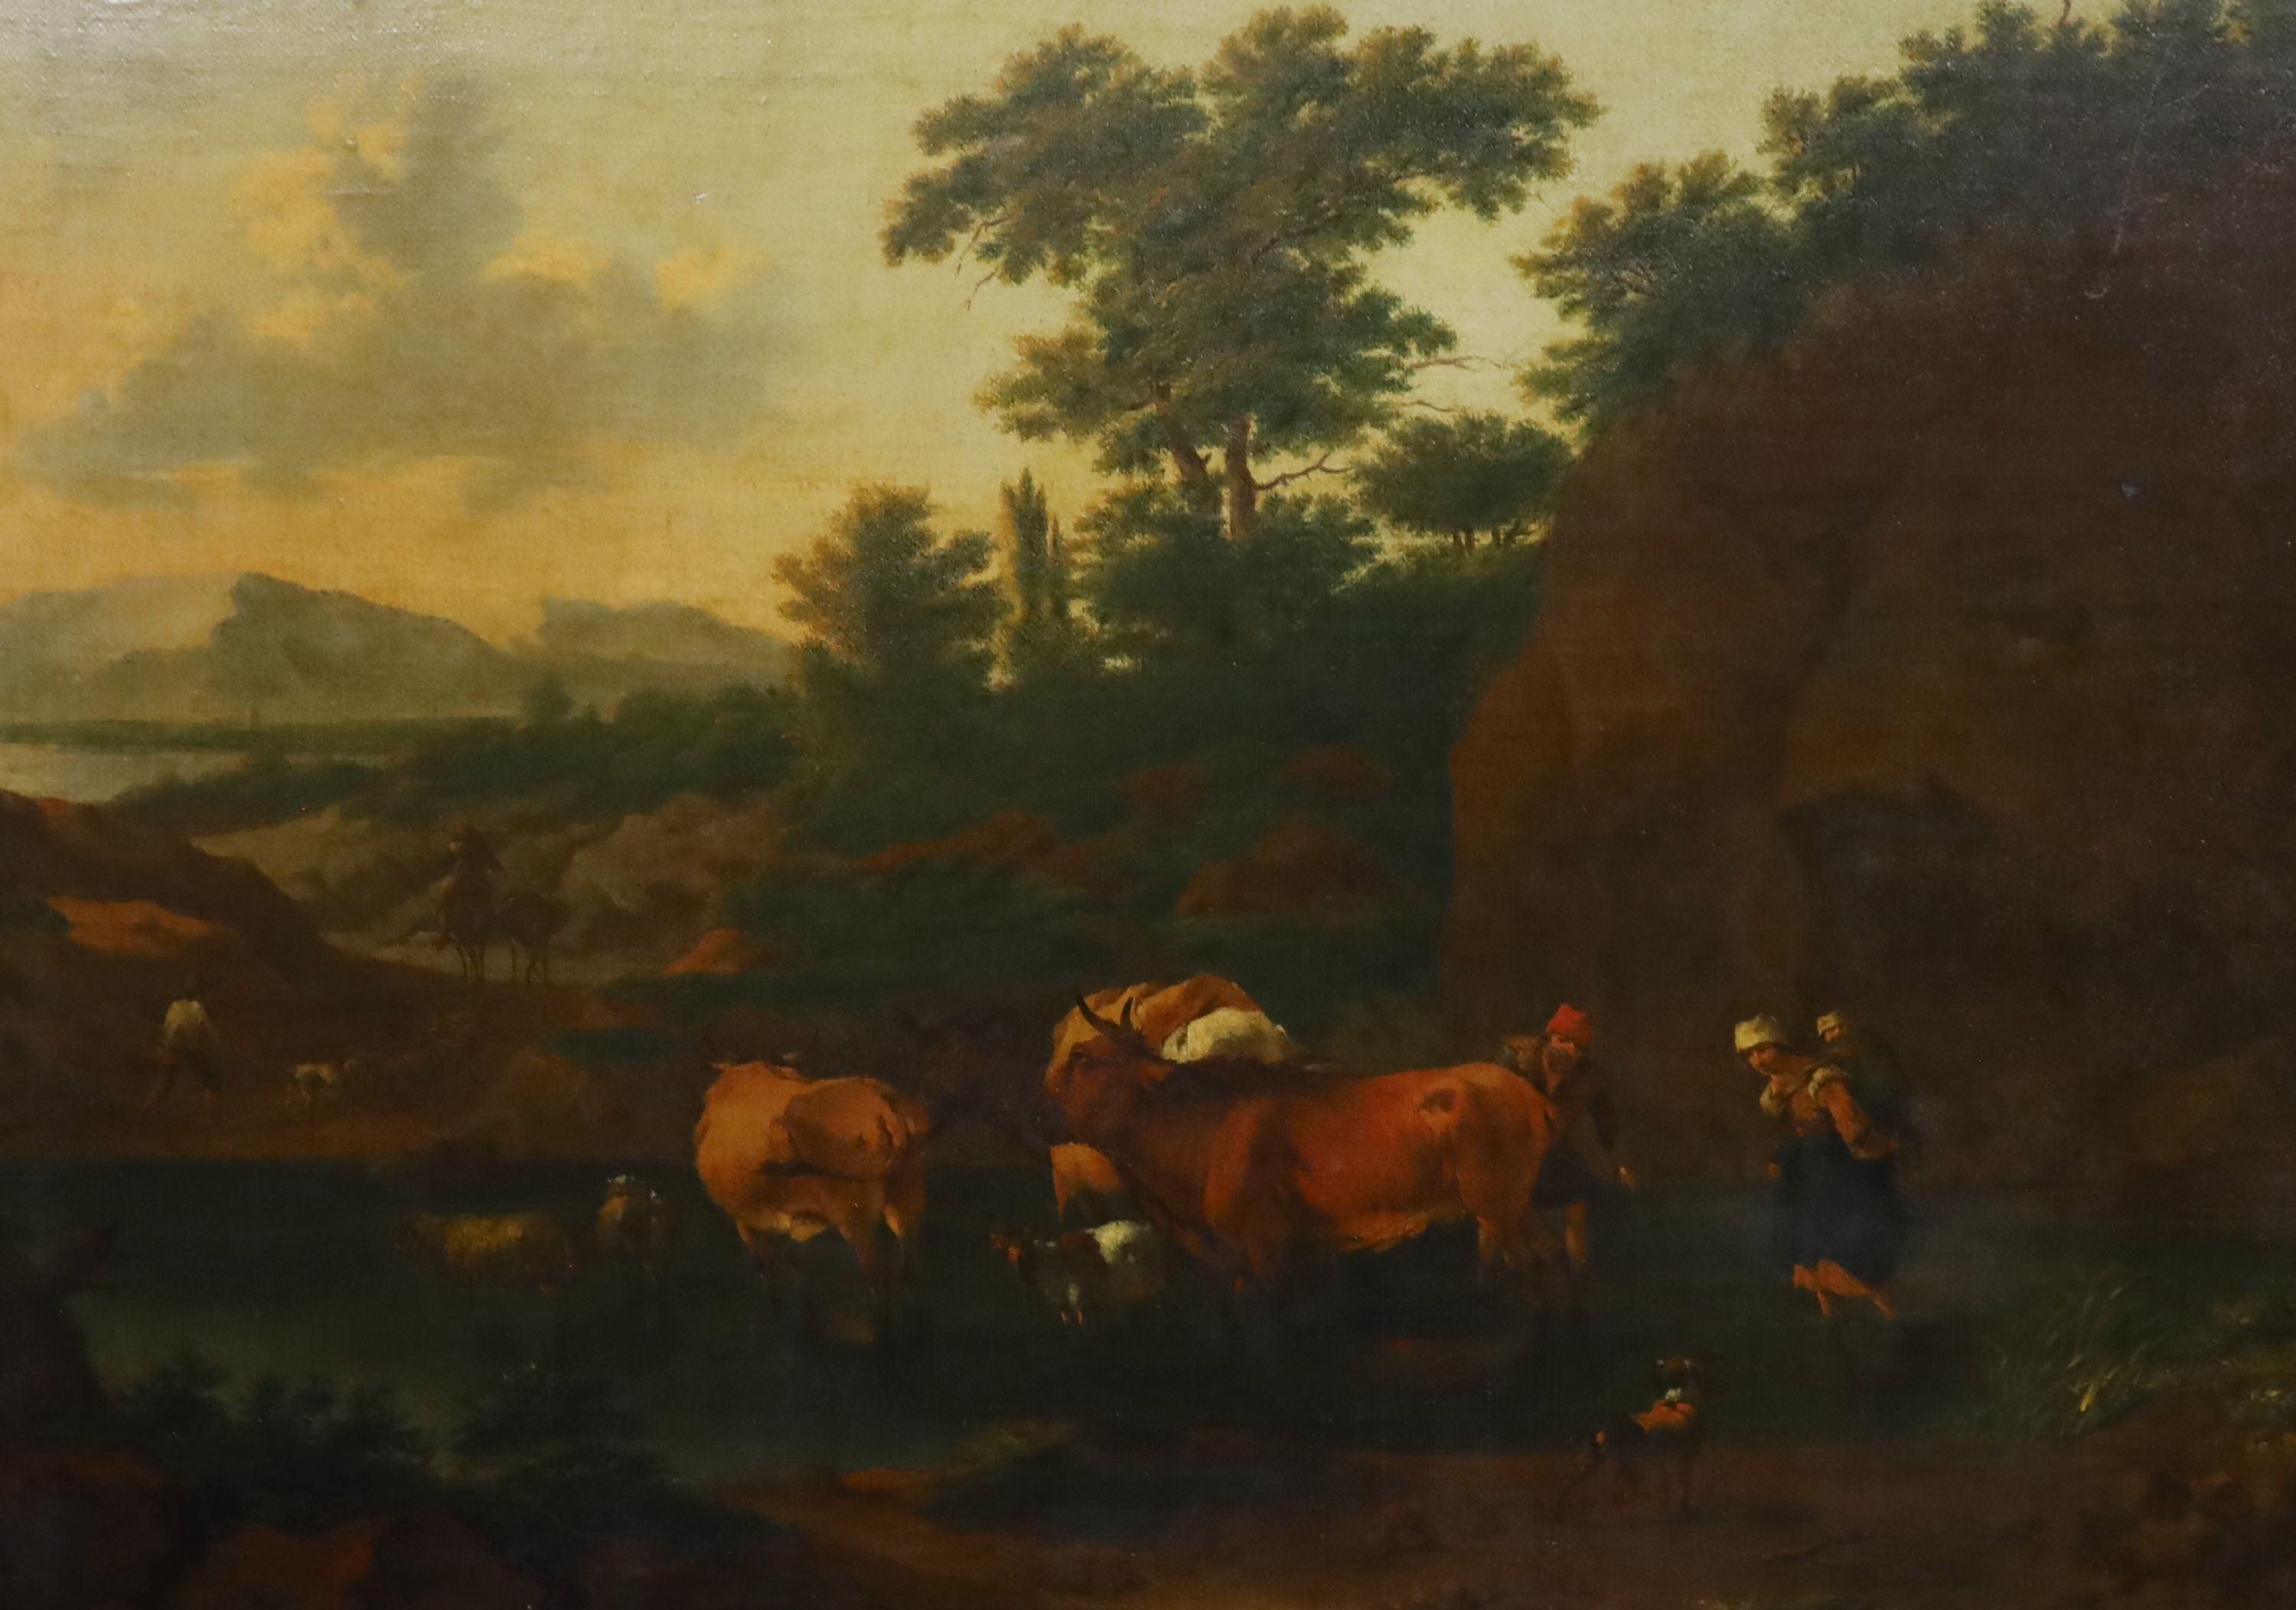 Attributed to Nicholaes Berchem (Dutch, 1620-1683), Landscape with cattle drovers crossing a river, oil on canvas laid onto a wooden panel, 41 x 57cm                                                                       